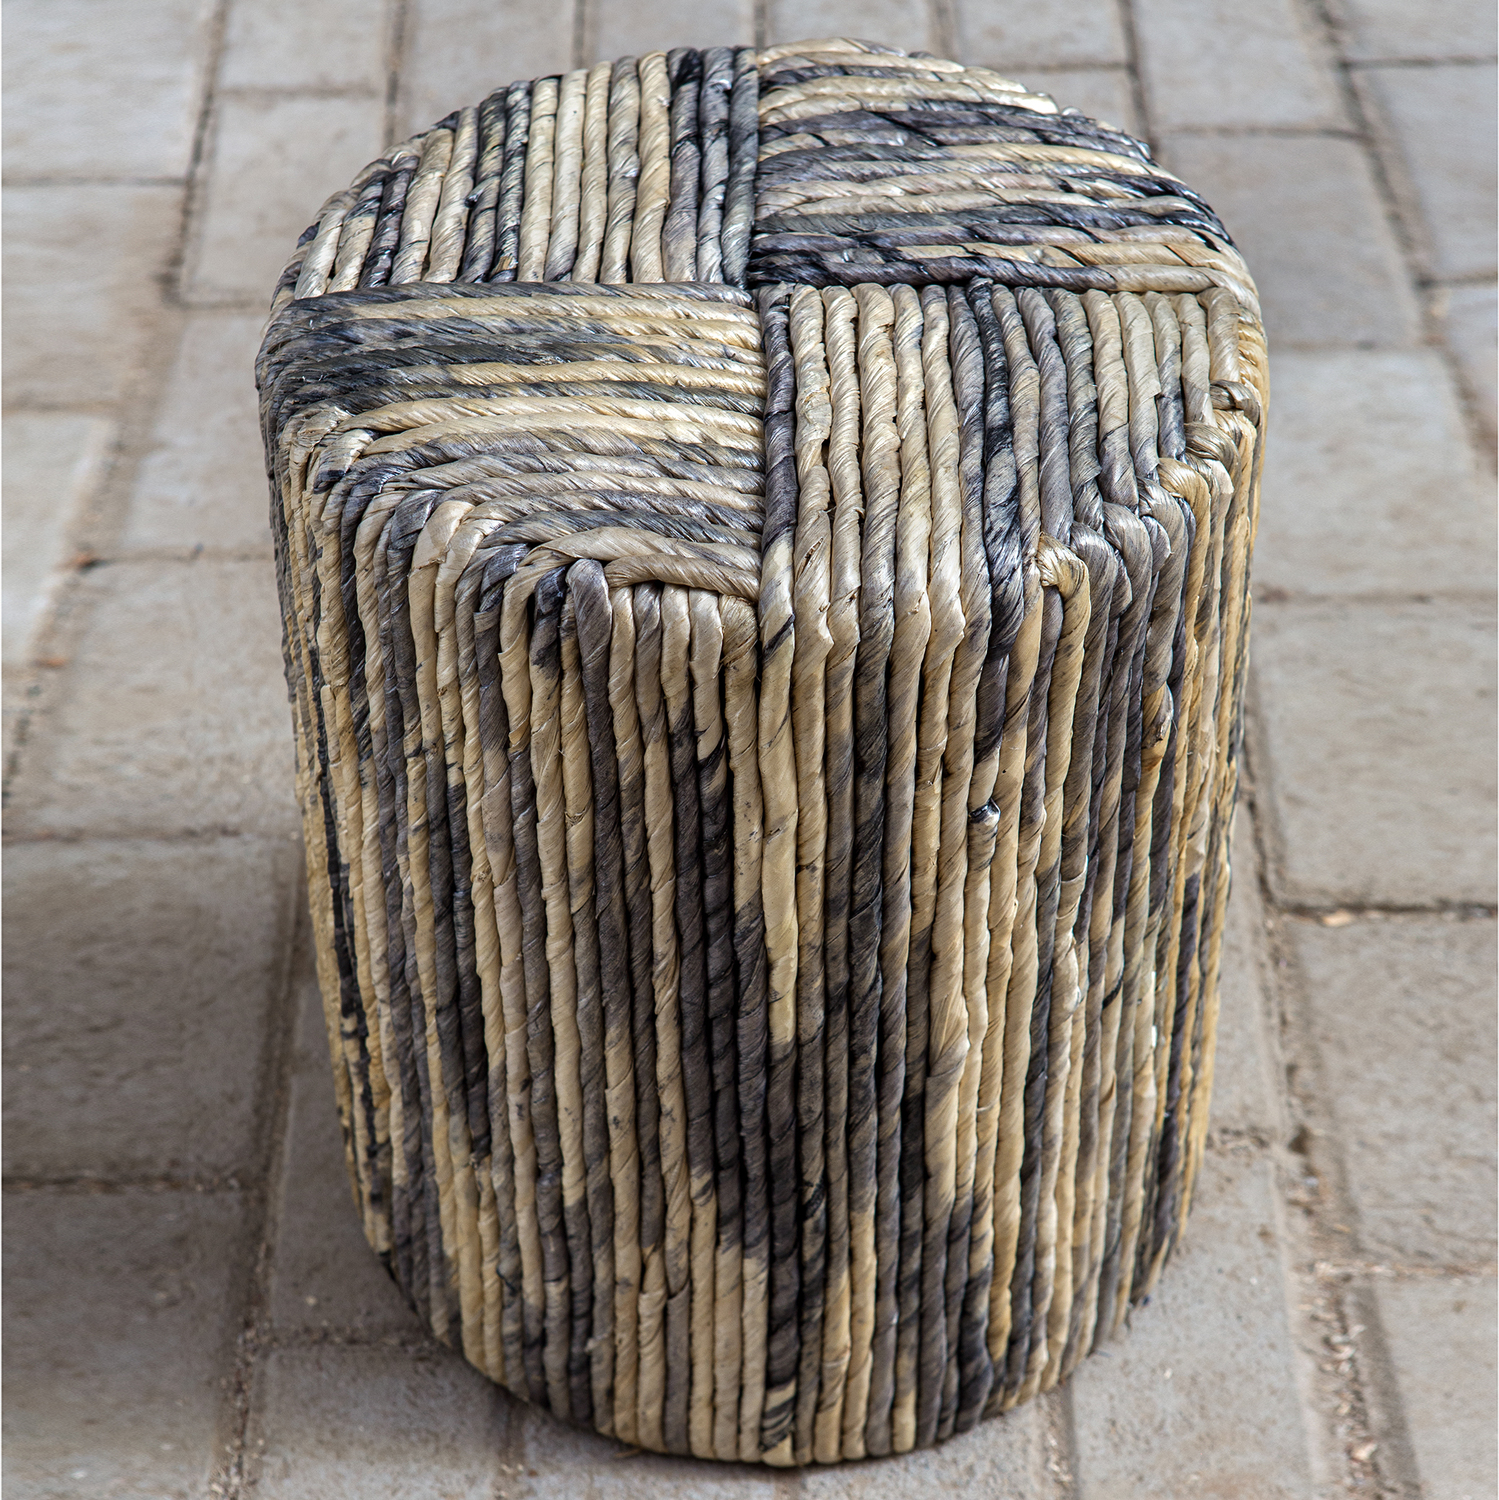 living room velvet chairs Uttermost  Accent Stools Inspired By Casual Coastal Style, This Accent Stool Is Layered In A Woven Banana Leaf Exterior In Gray And Natural Color Tones. Group Multiples Together For A Fun Display Or Use Individually For Smaller Spaces.